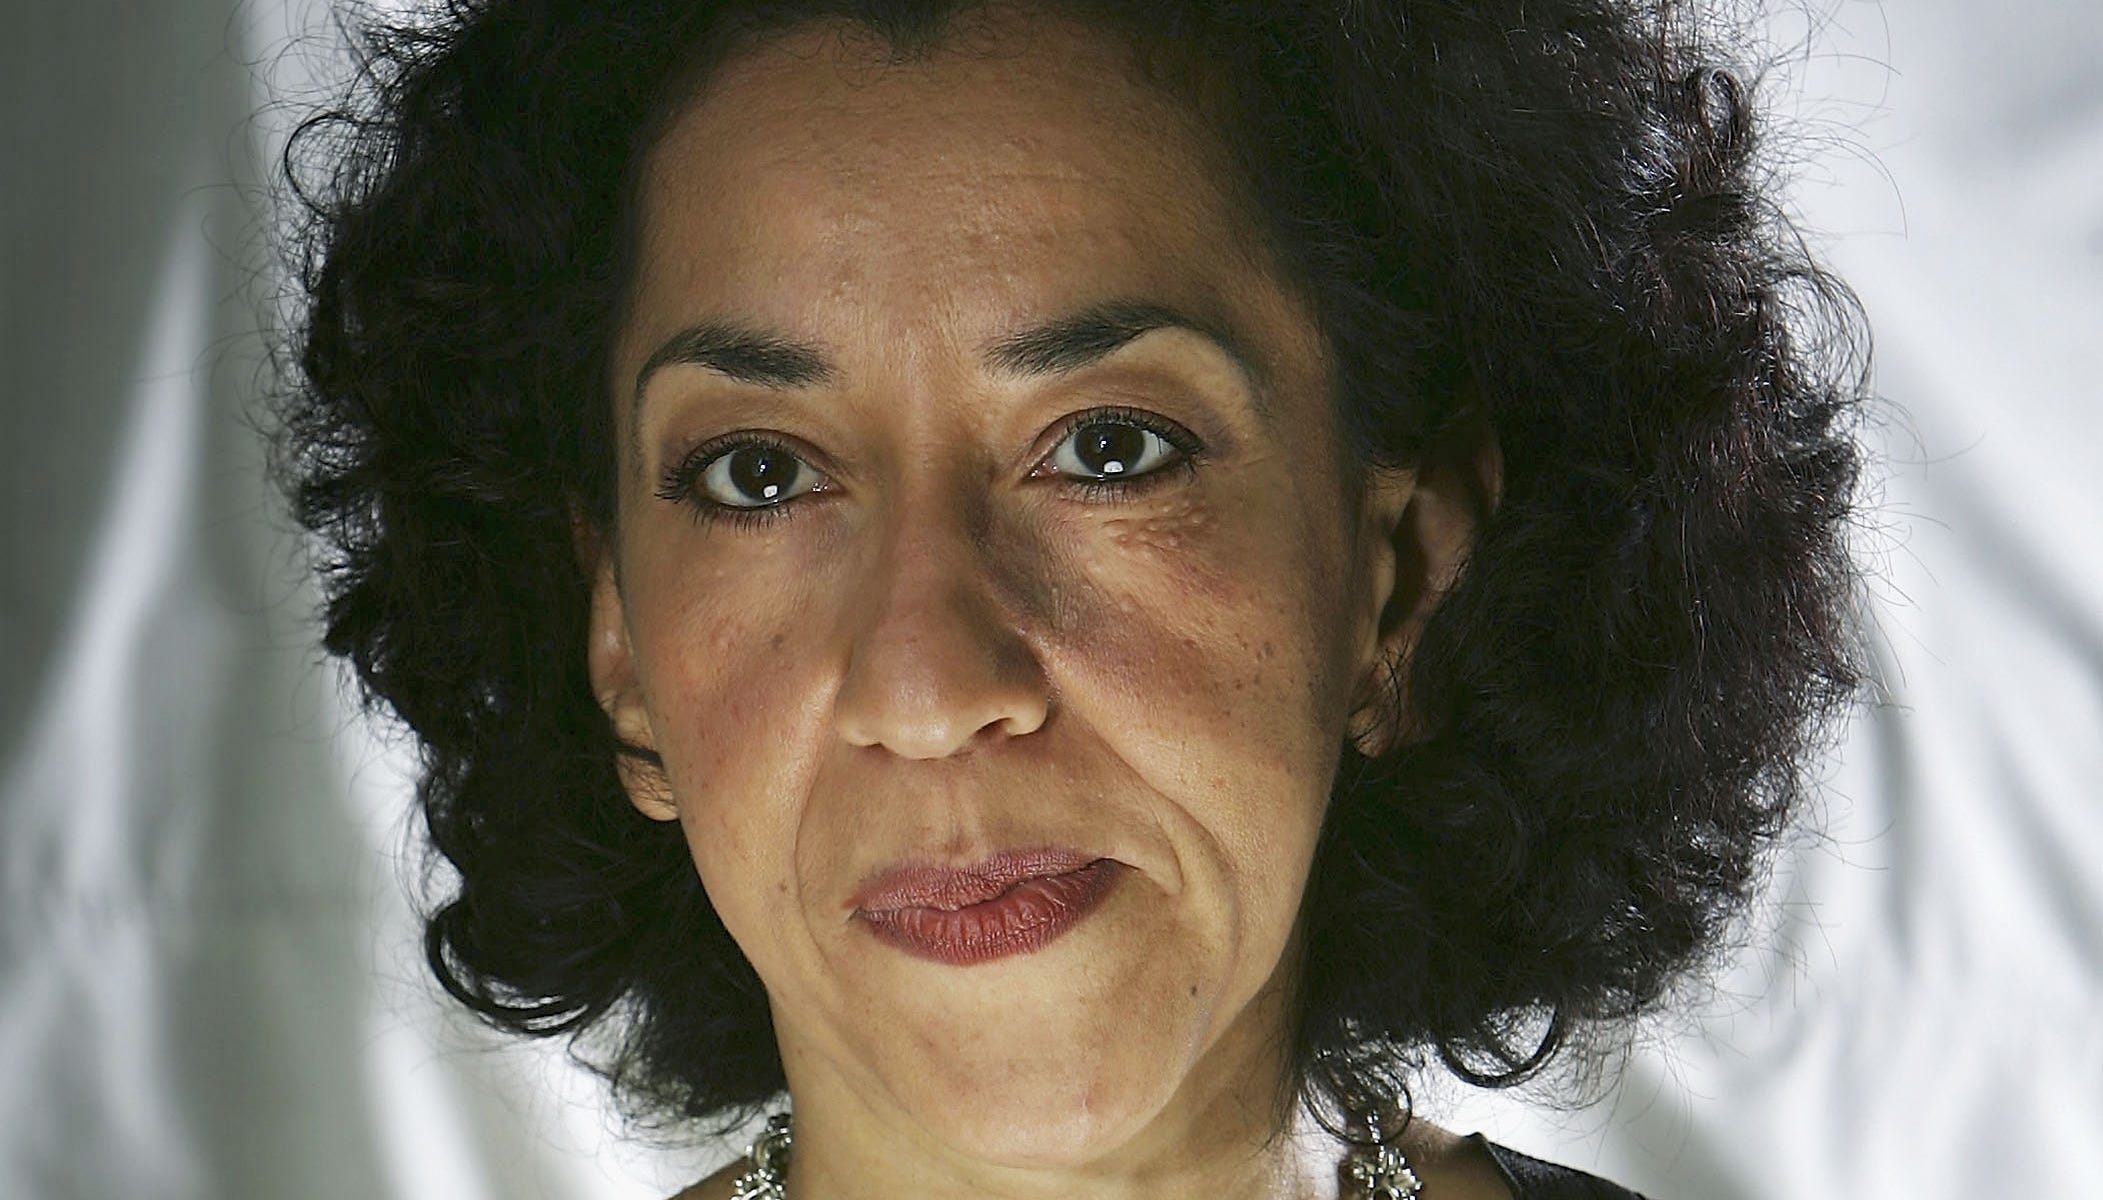 the long story andrea levy